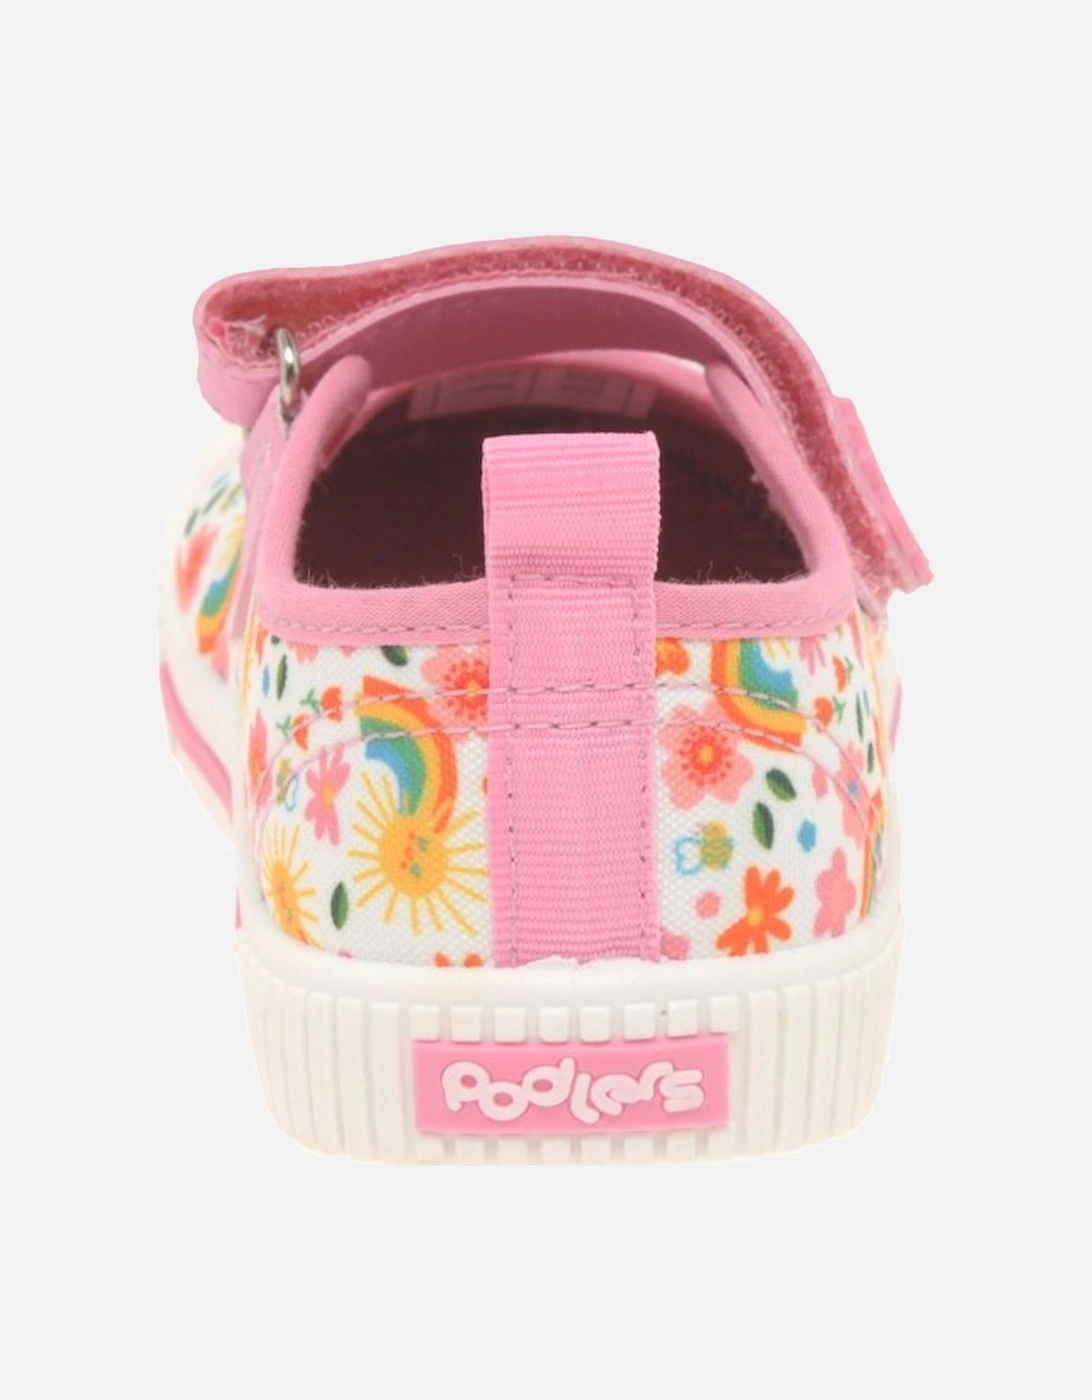 Halle Mary Jane Girls Infant Canvas Shoes